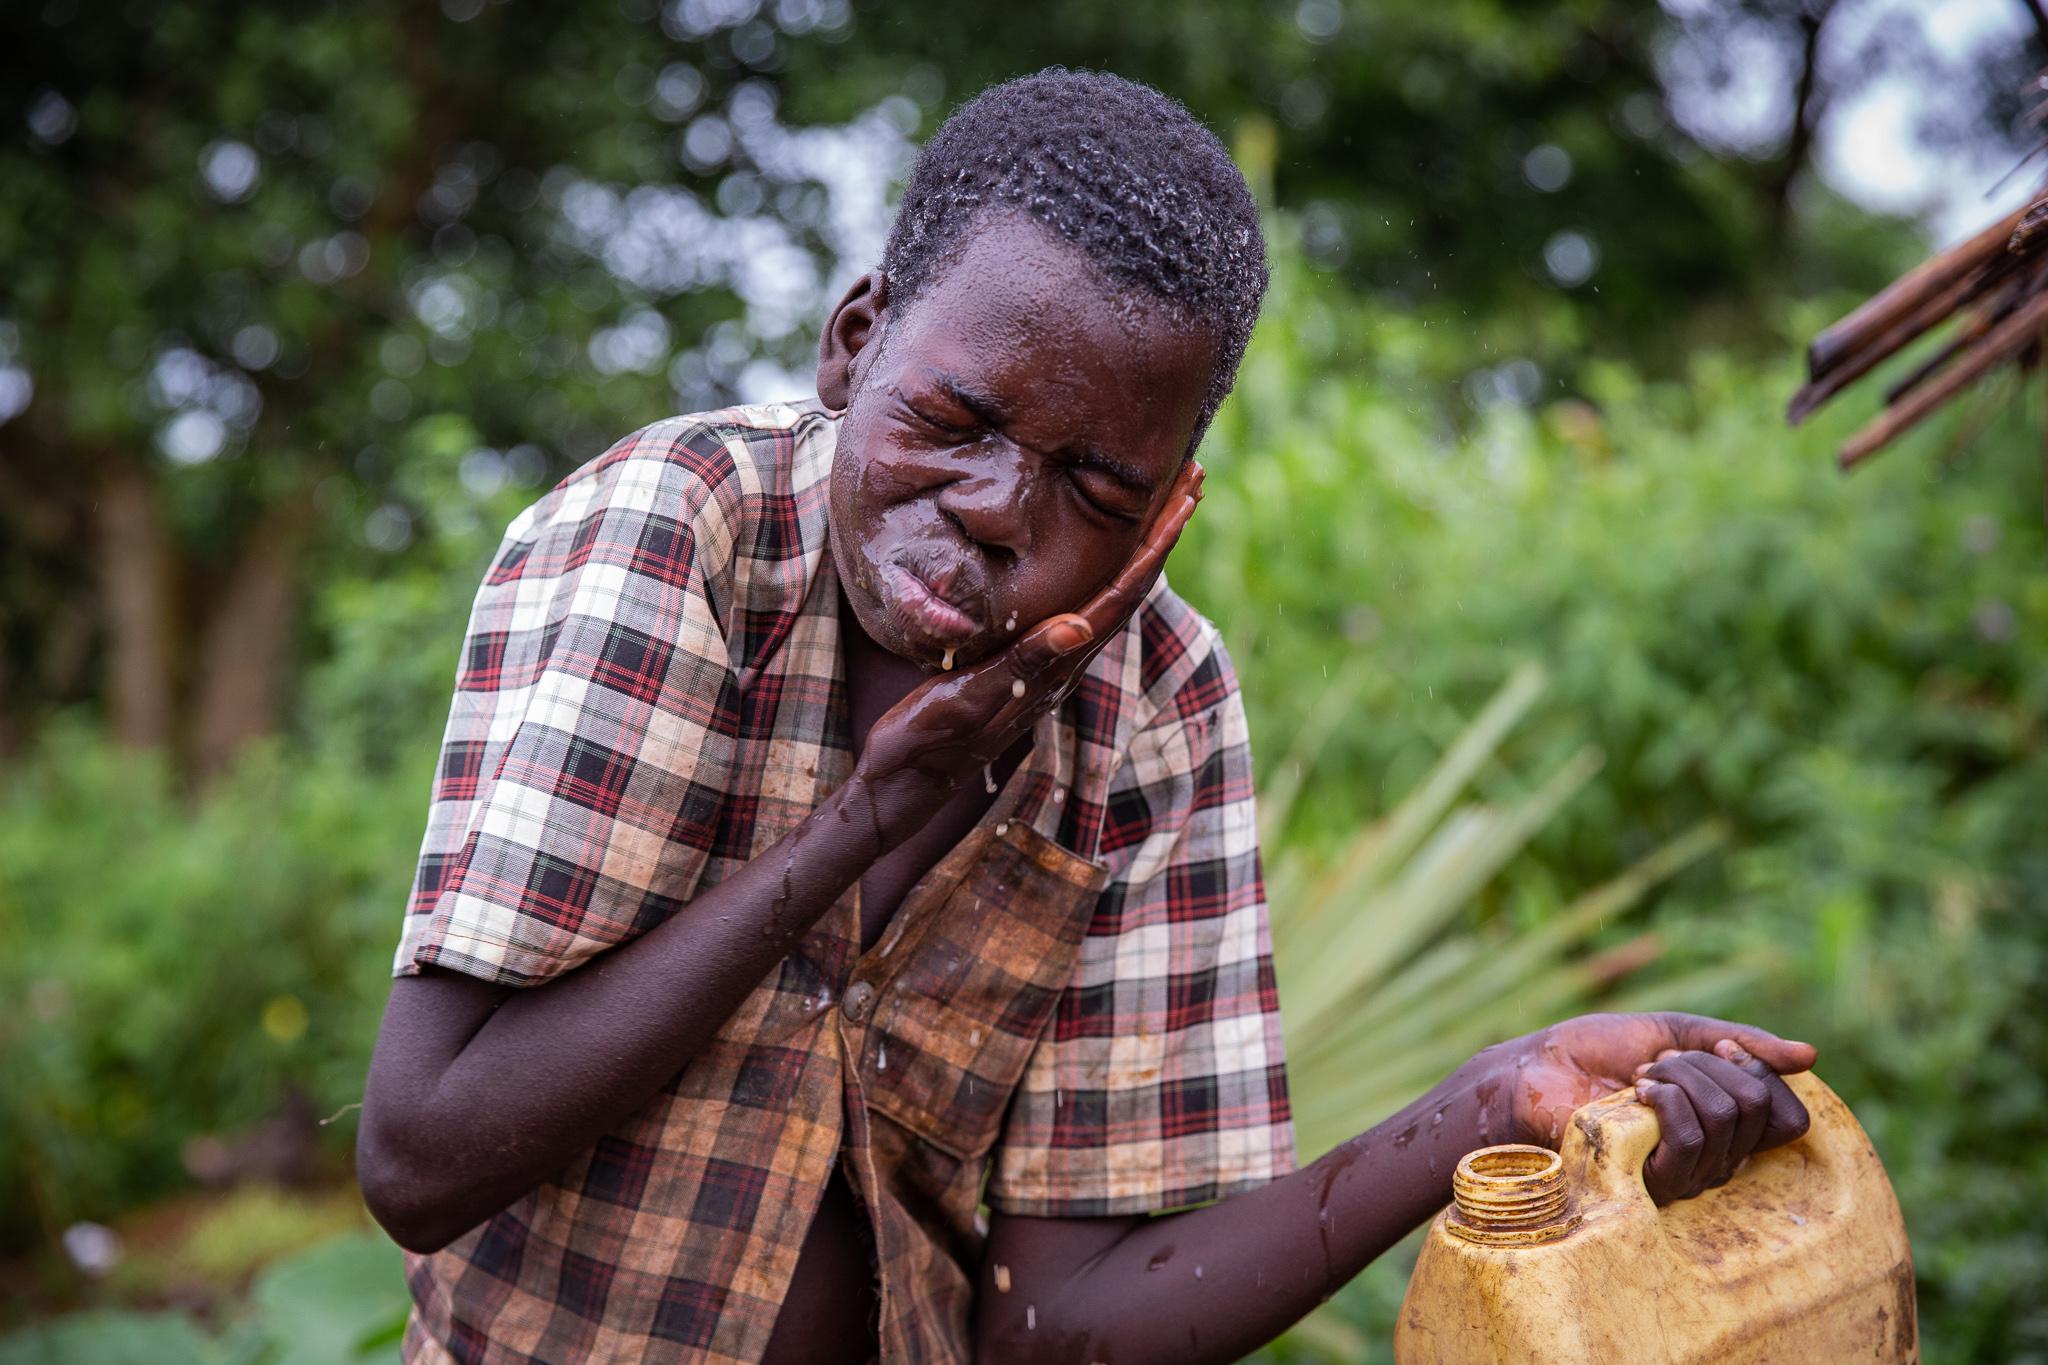 A Mysterious Fate: Nodding Syndrome in Northern Uganda